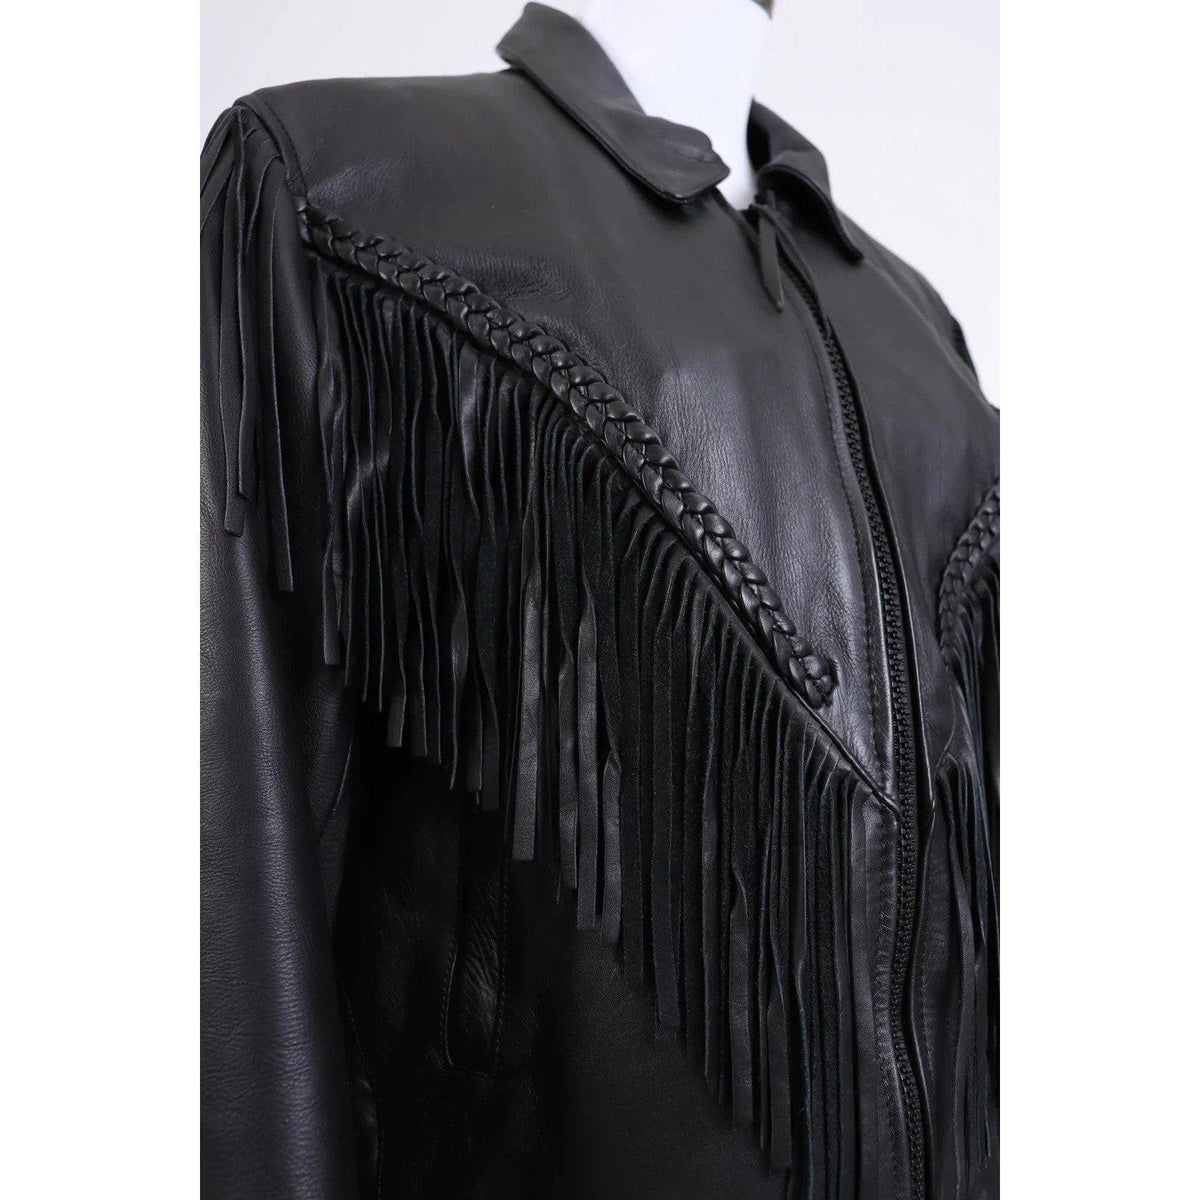 Pre-Owned RGC 90's Black Leather Biker Babe Jacket - theREMODA